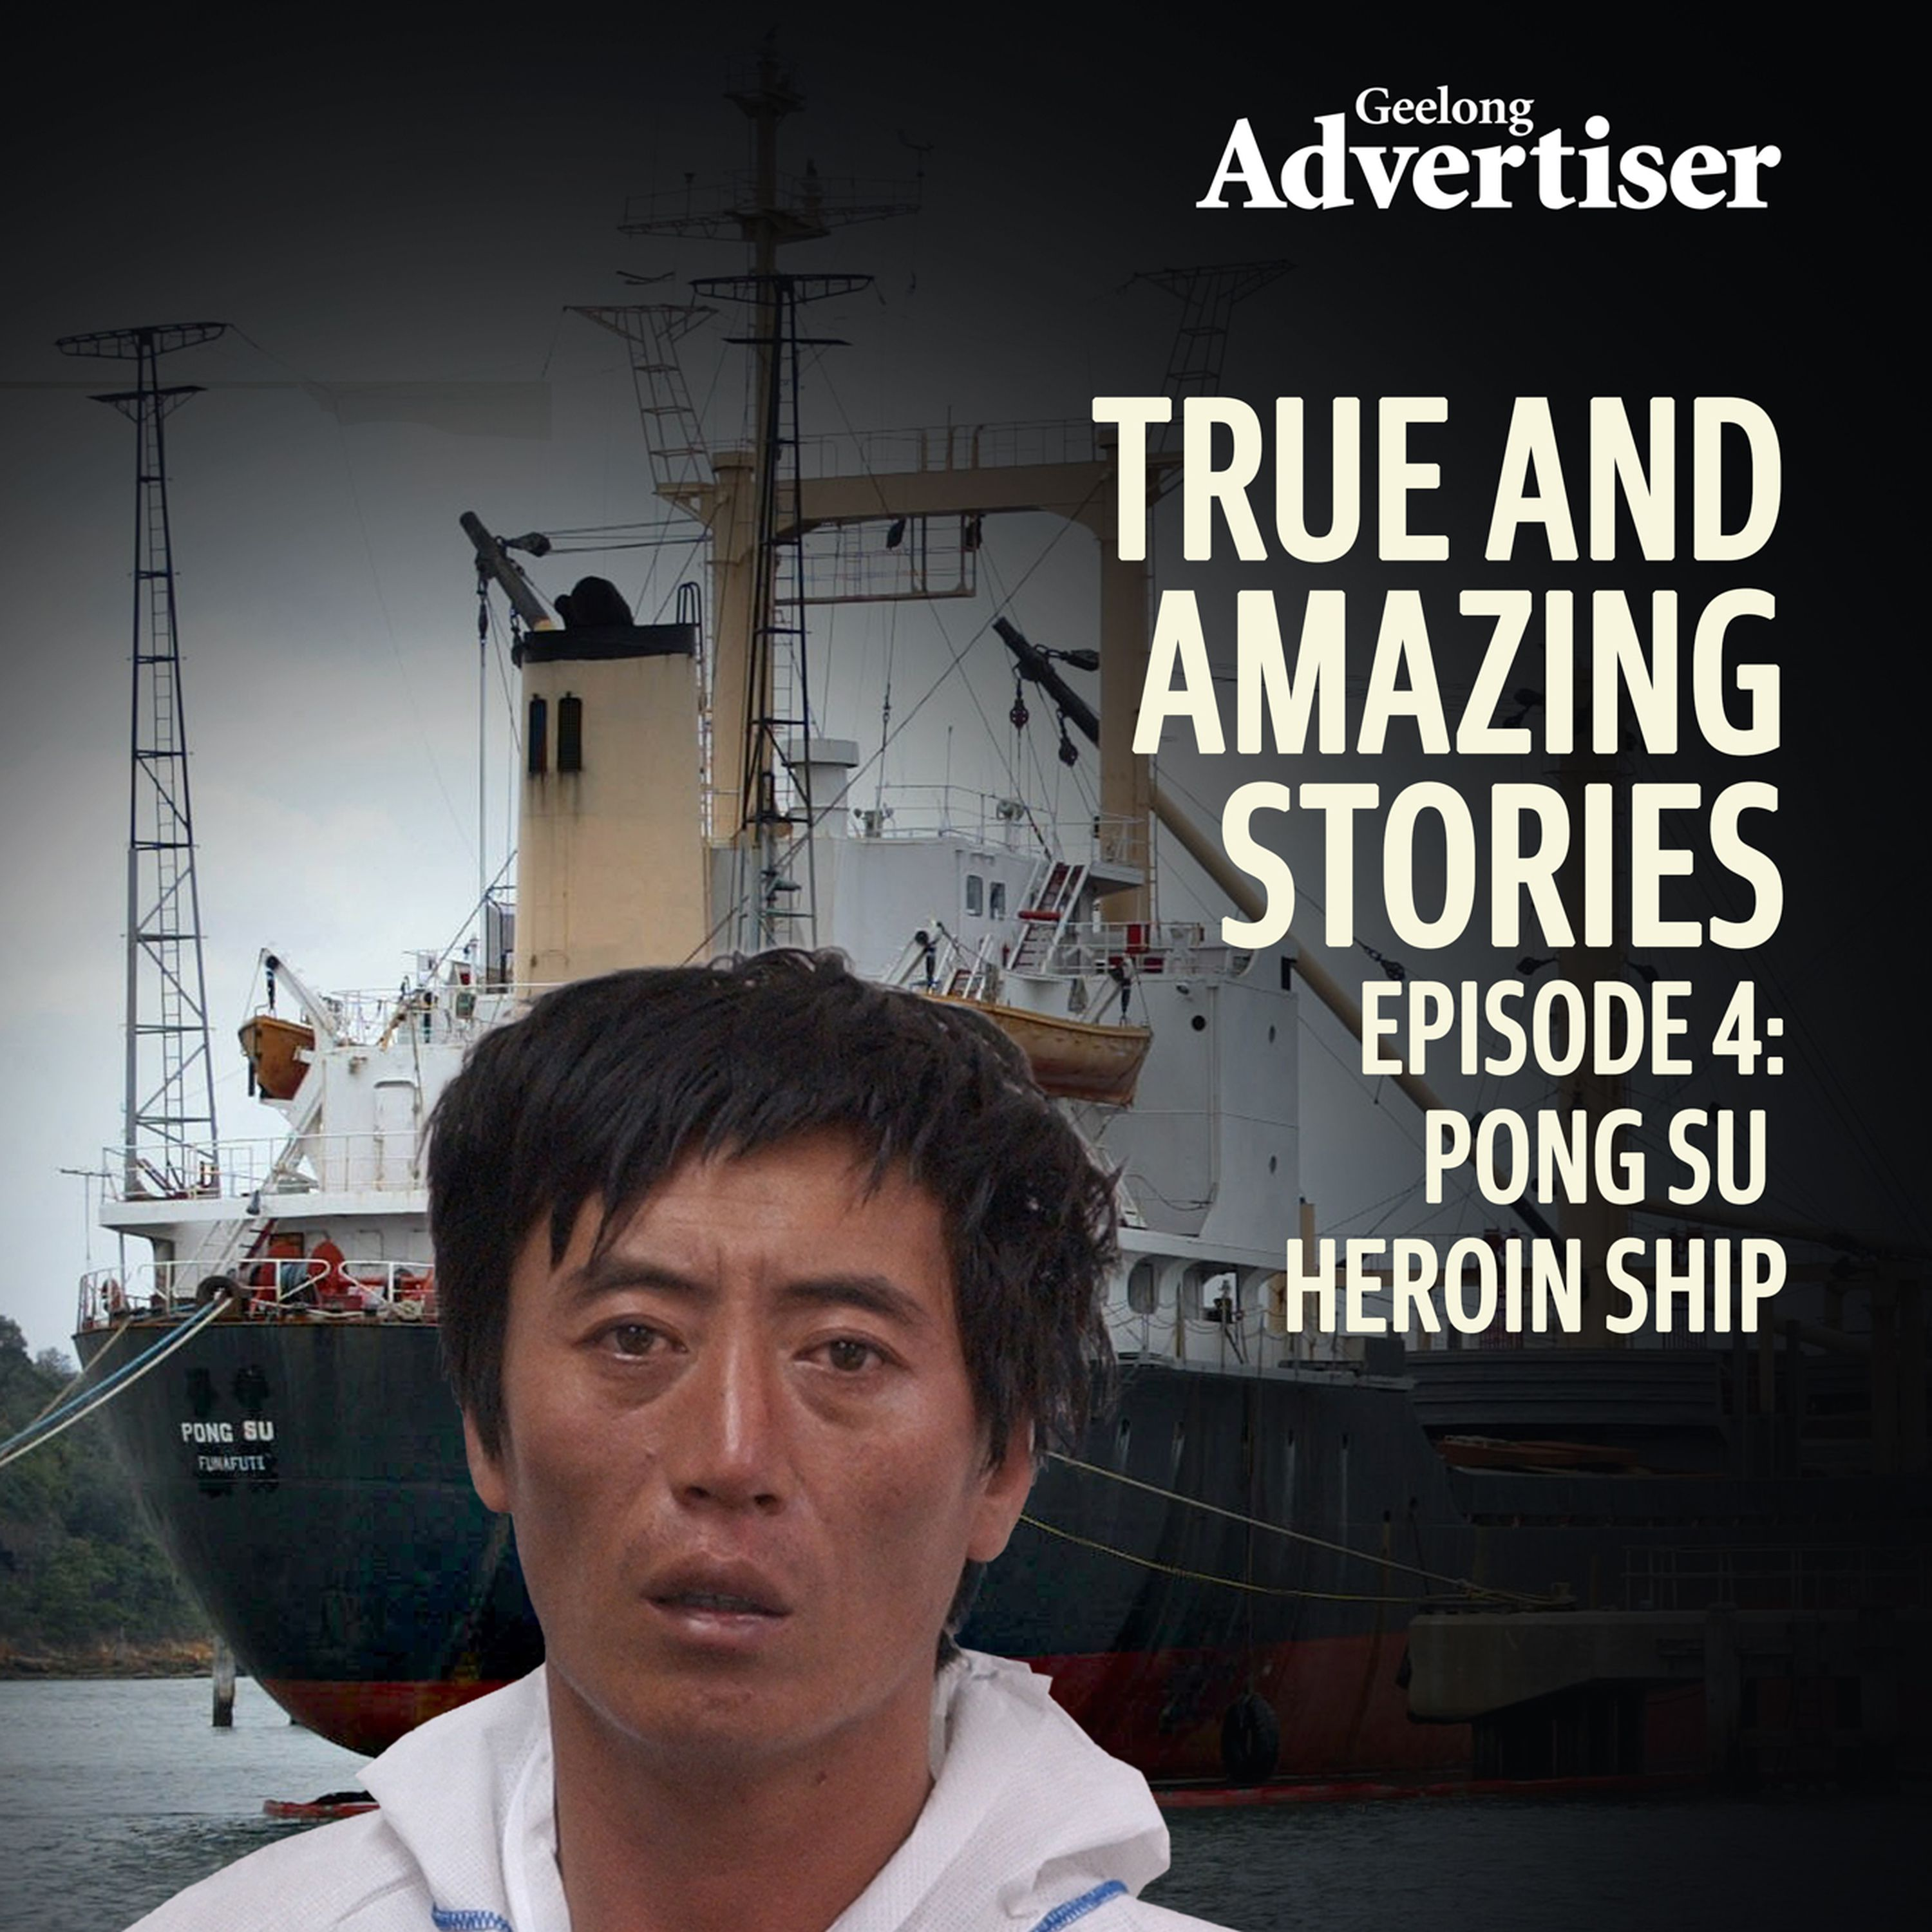 True and Amazing Stories Episode 4: The Pong Su